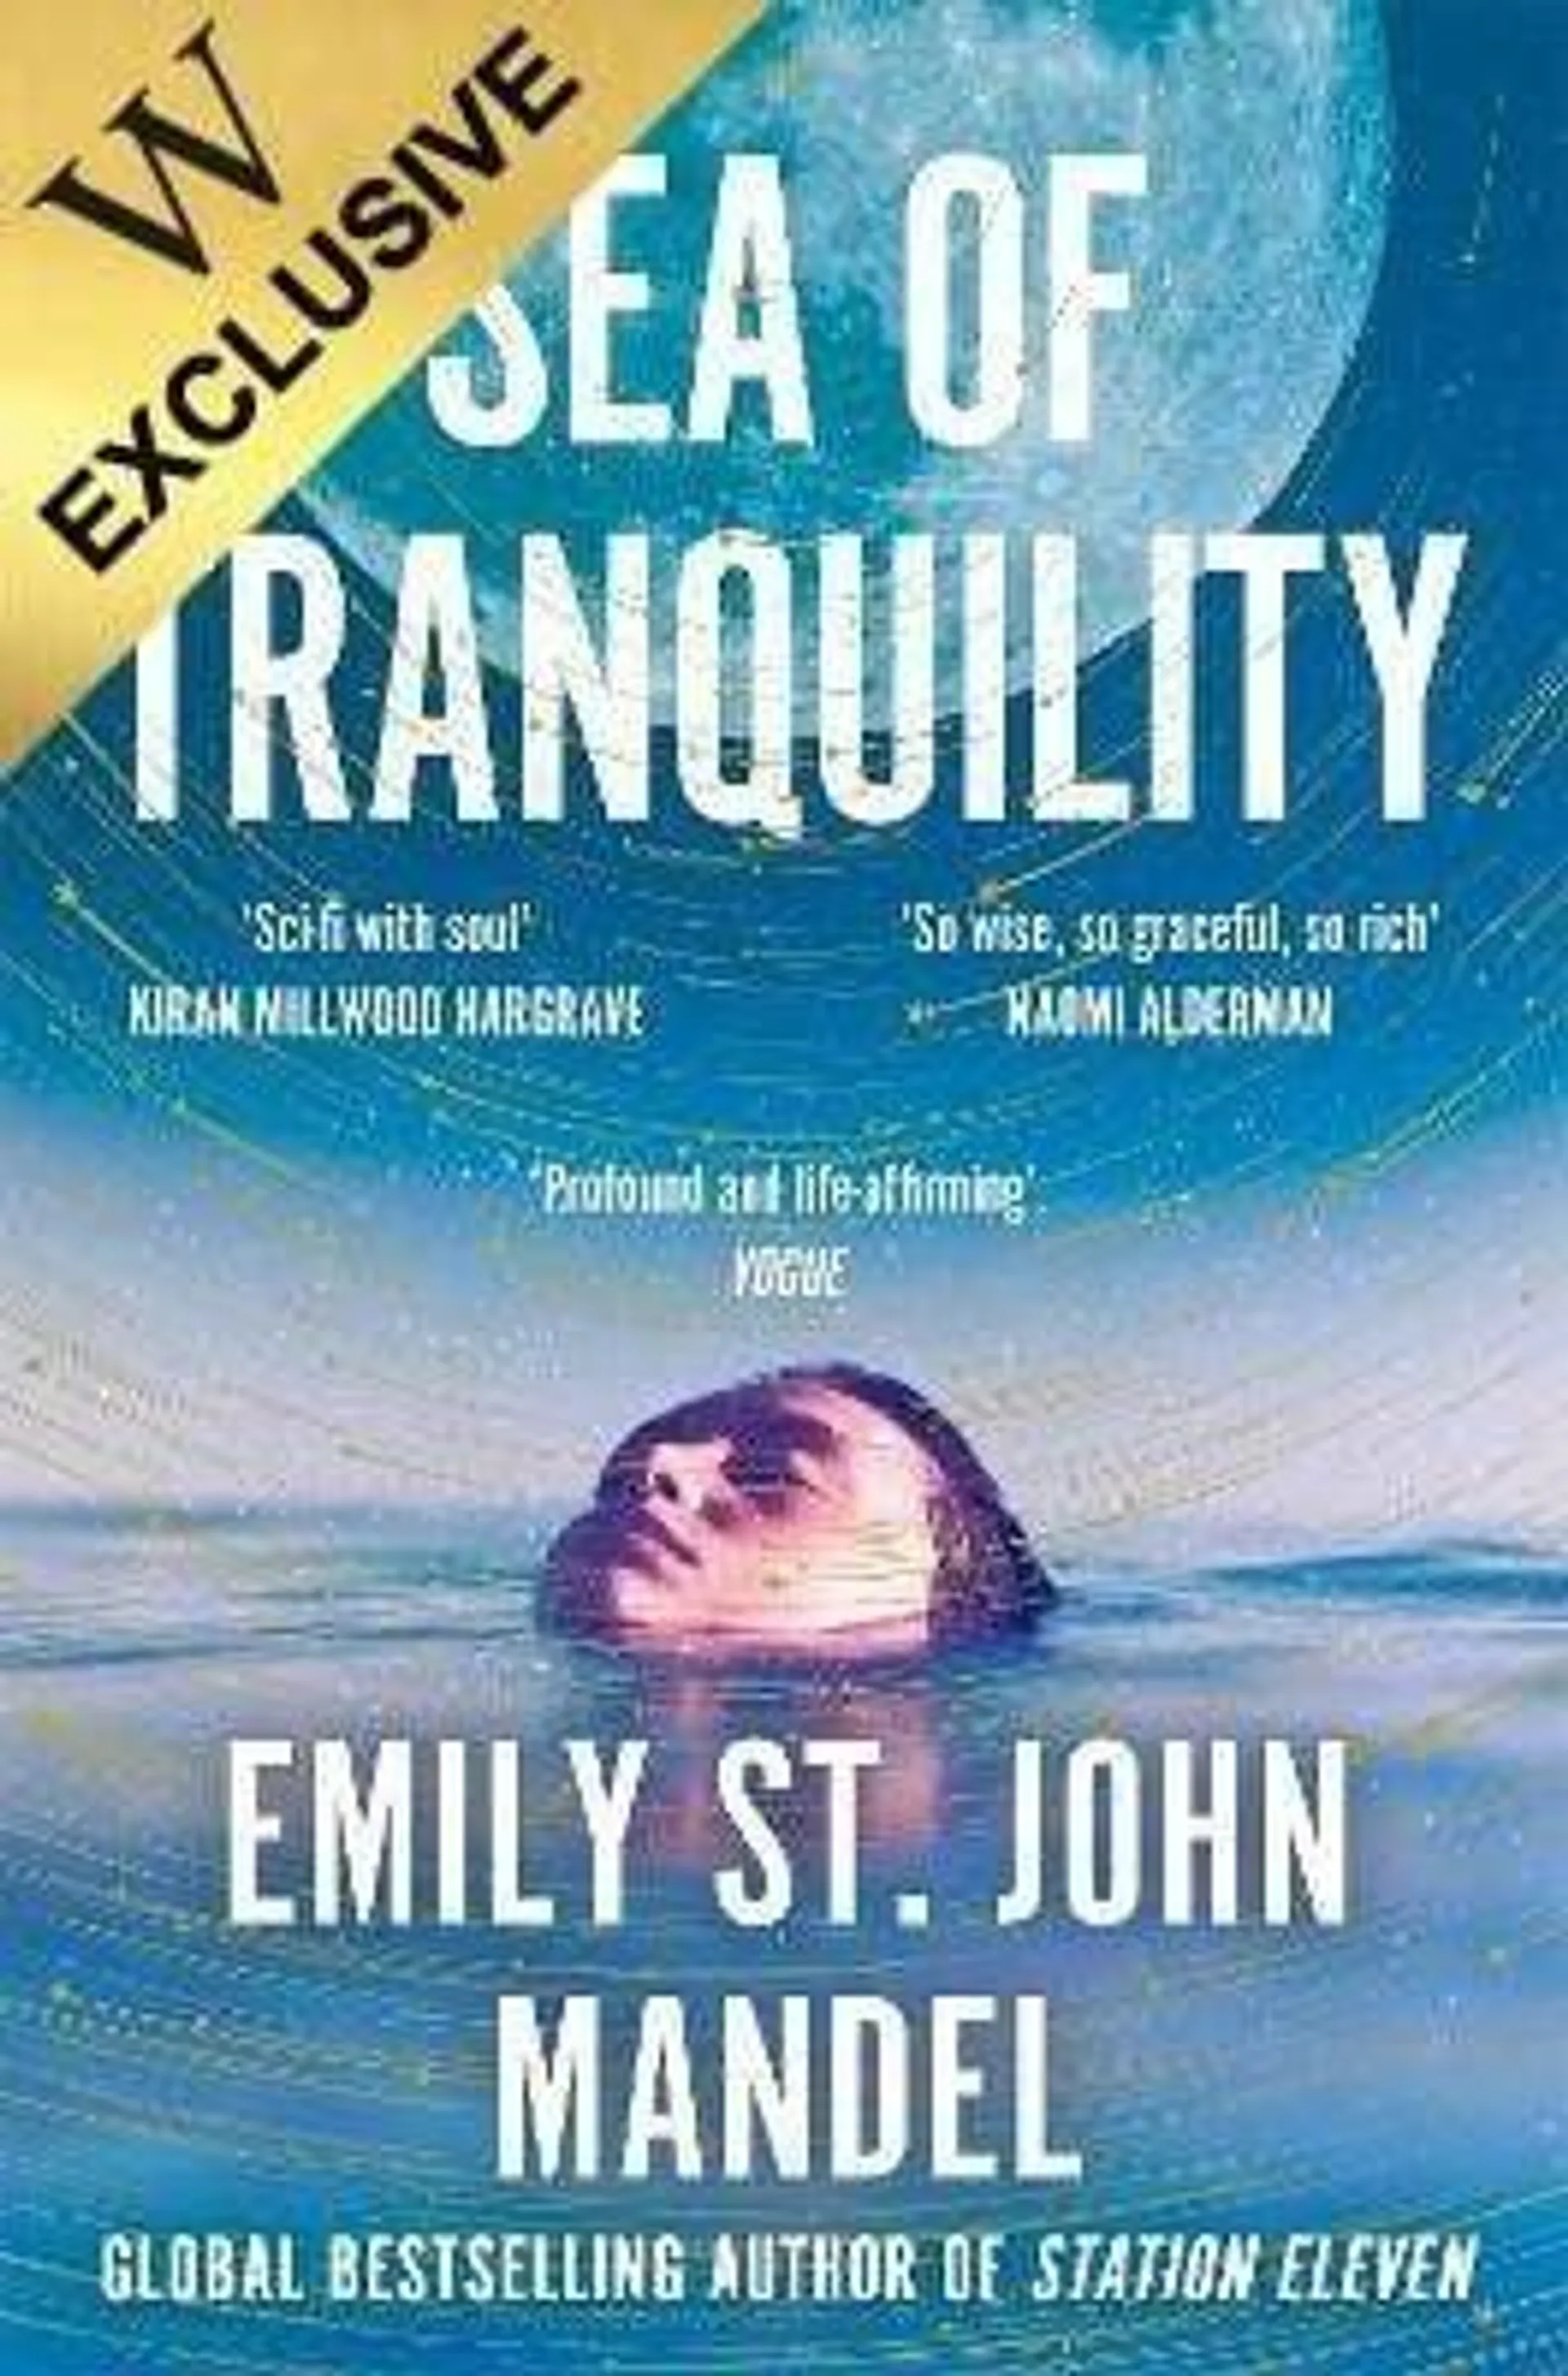 Sea of Tranquility: Exclusive Edition (Paperback)